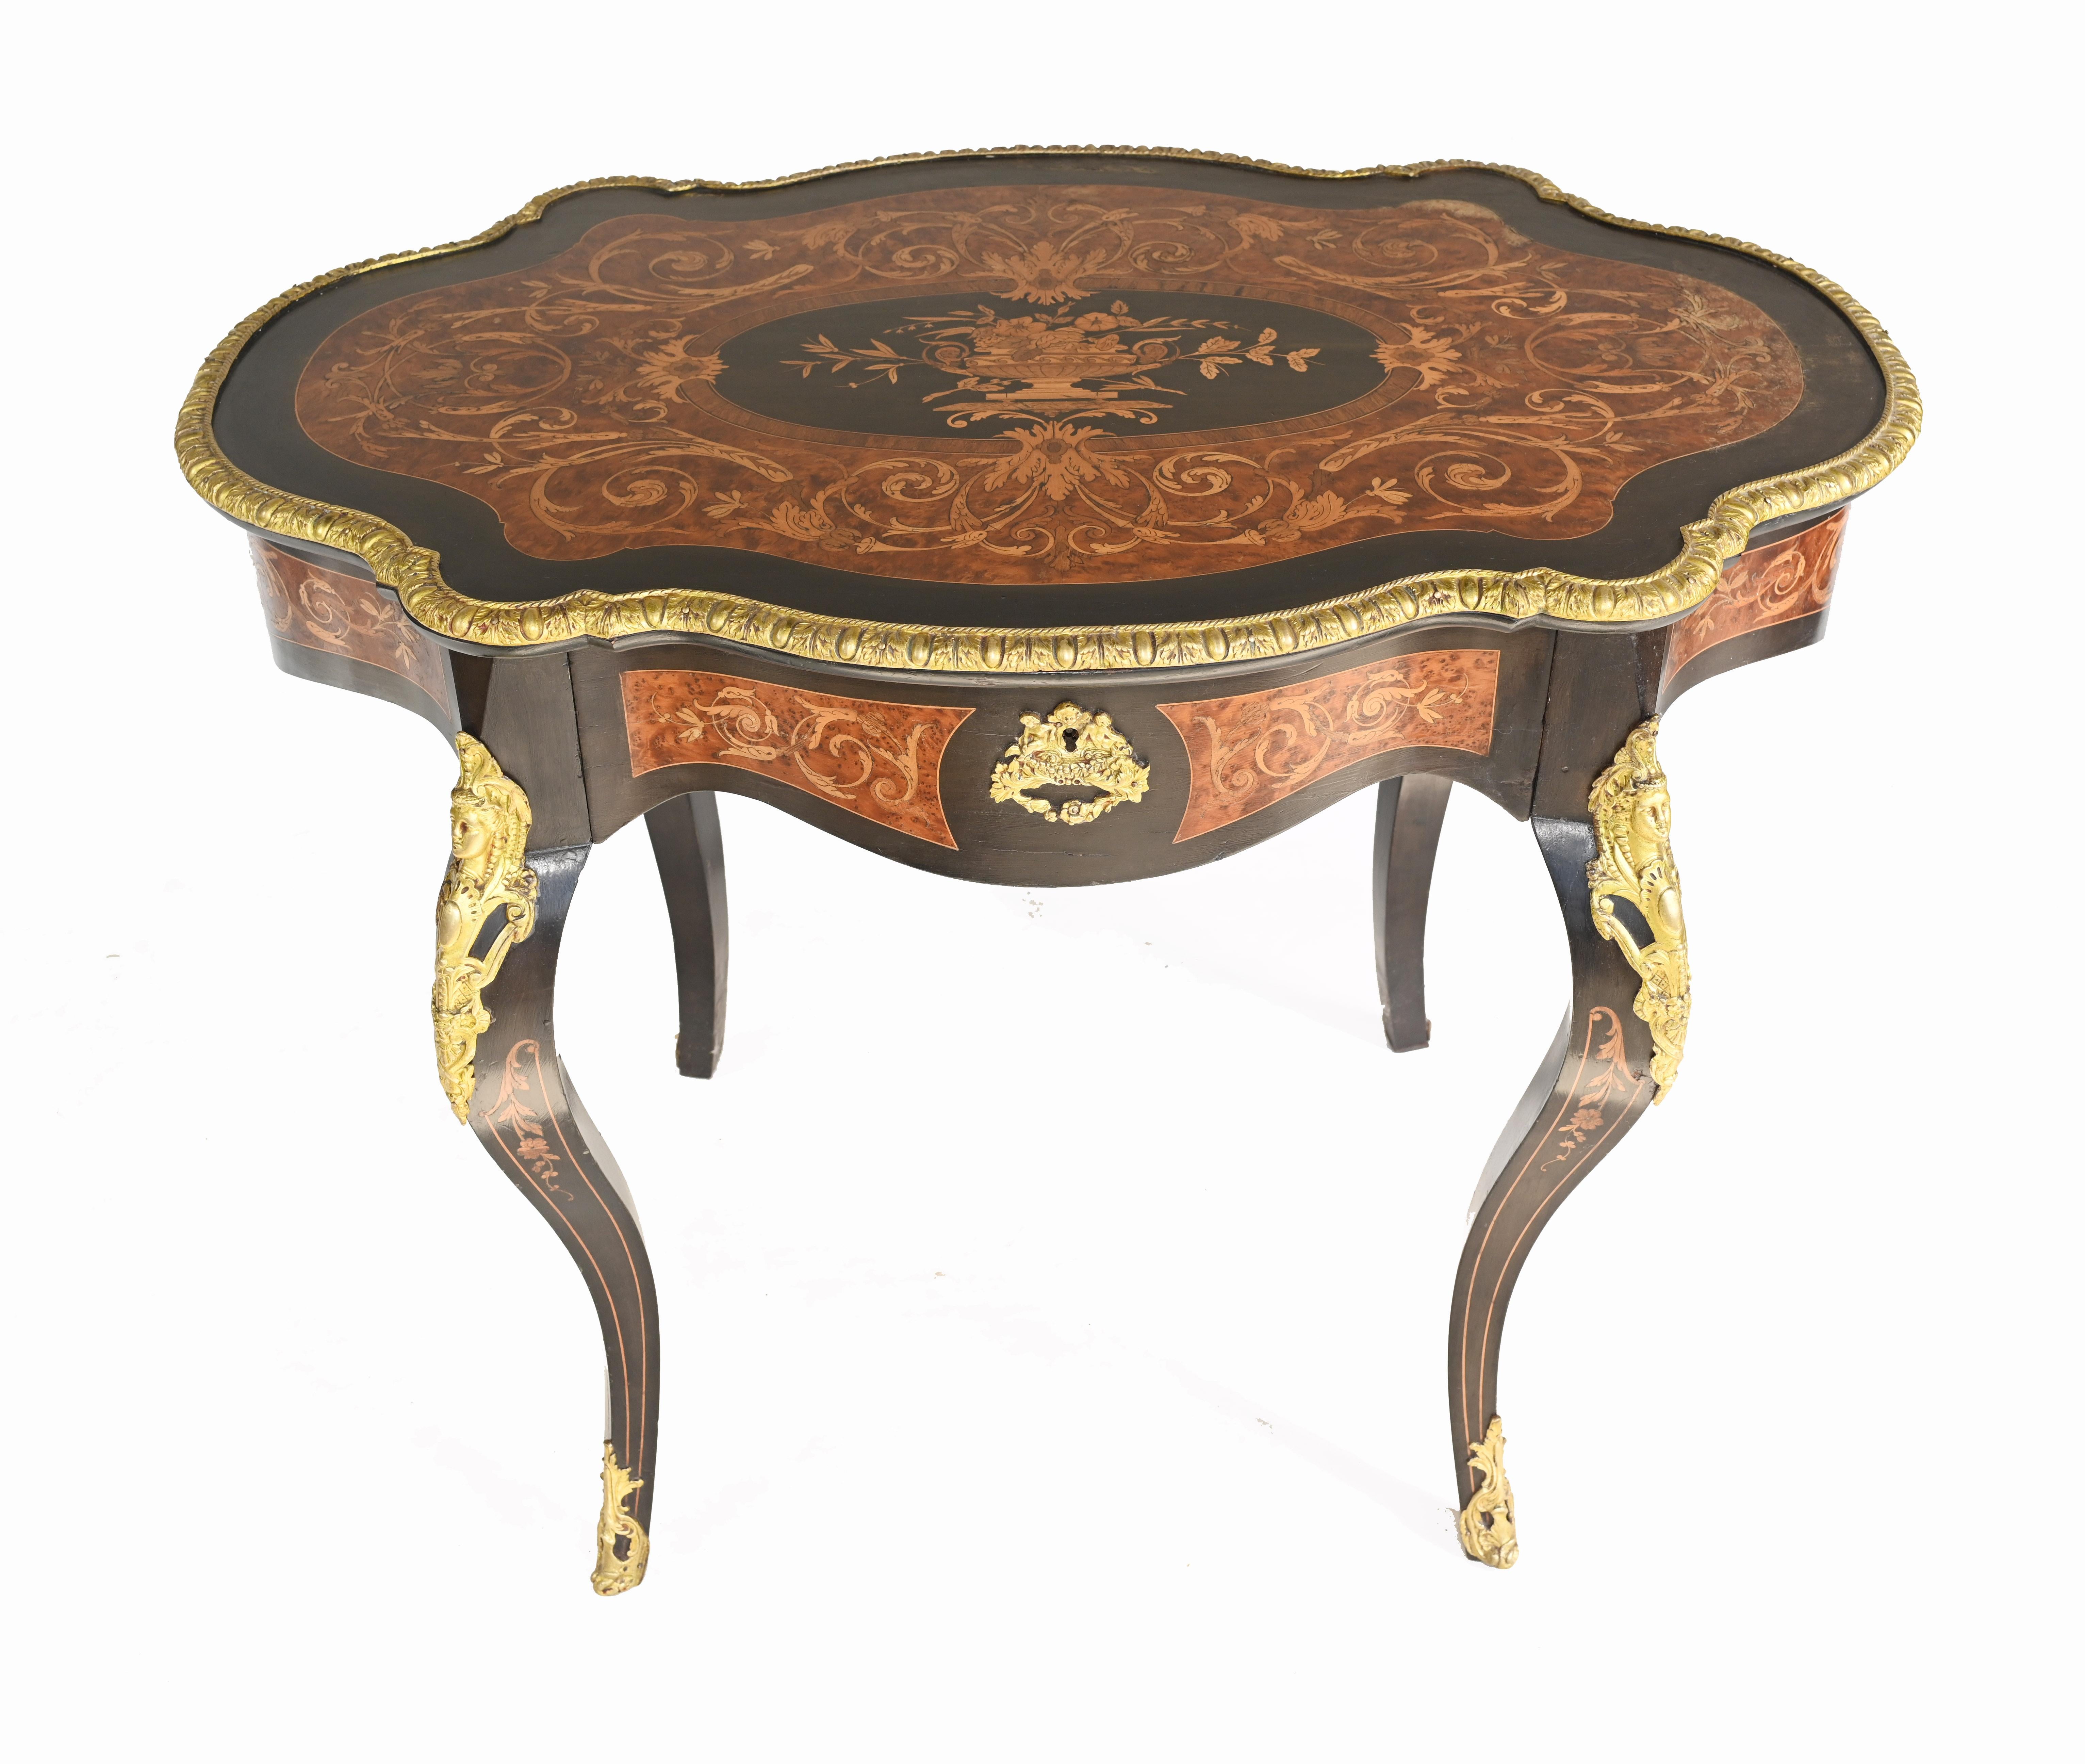 Charming Louis XVI centre table with curved shape top
Very distinctive look - could also function as a desk
We date this piece to circa 1880
Bought from a dealer on Marche Biron at Paris antiques market
Some of our items are in storage so please